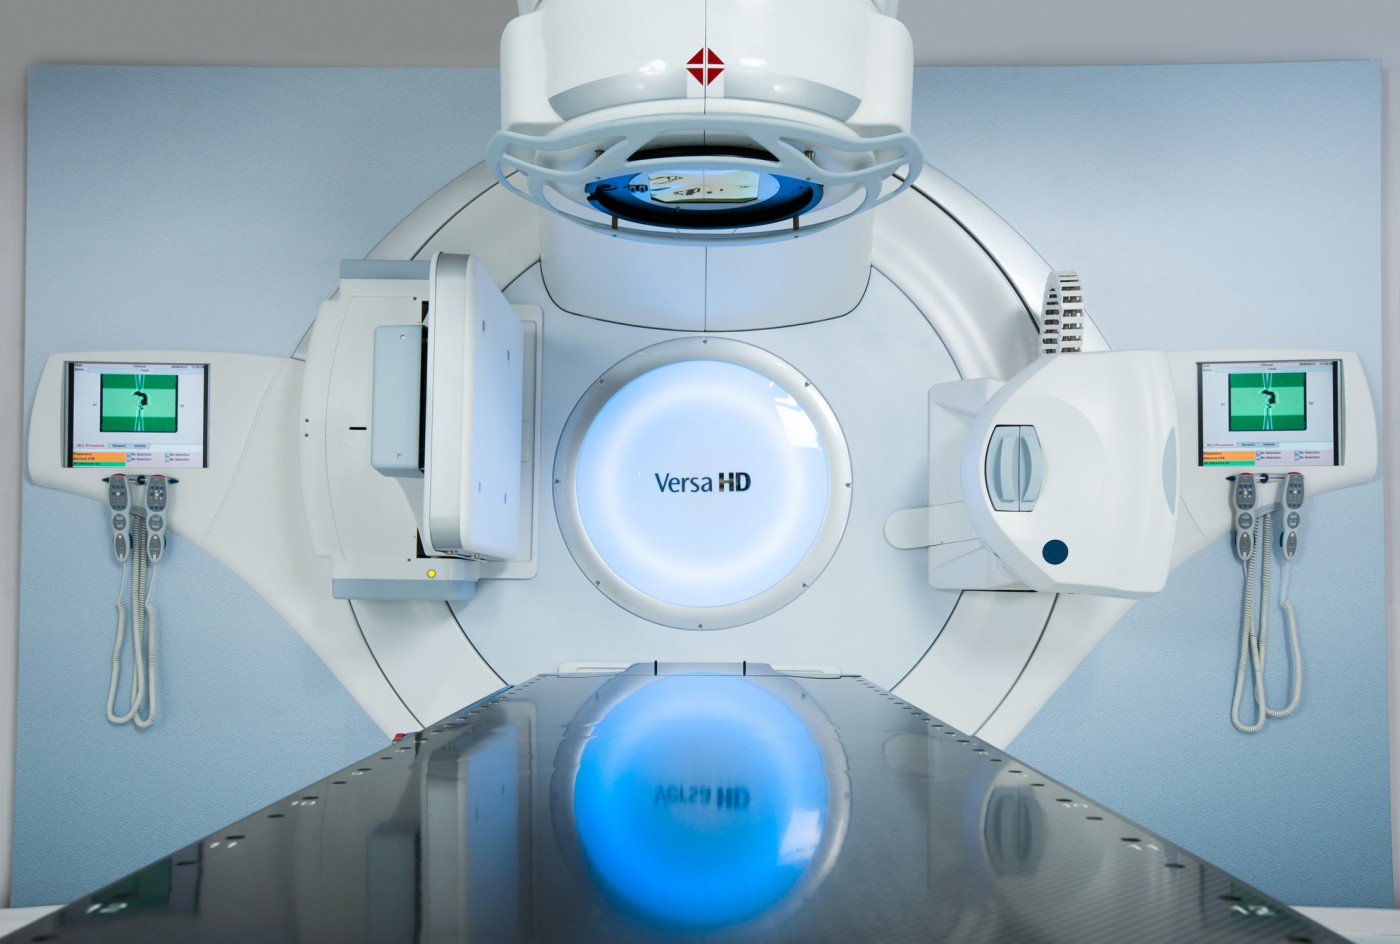 Elekta’s Versa HD Radiation Therapy System Implemented in Three Australian Centers